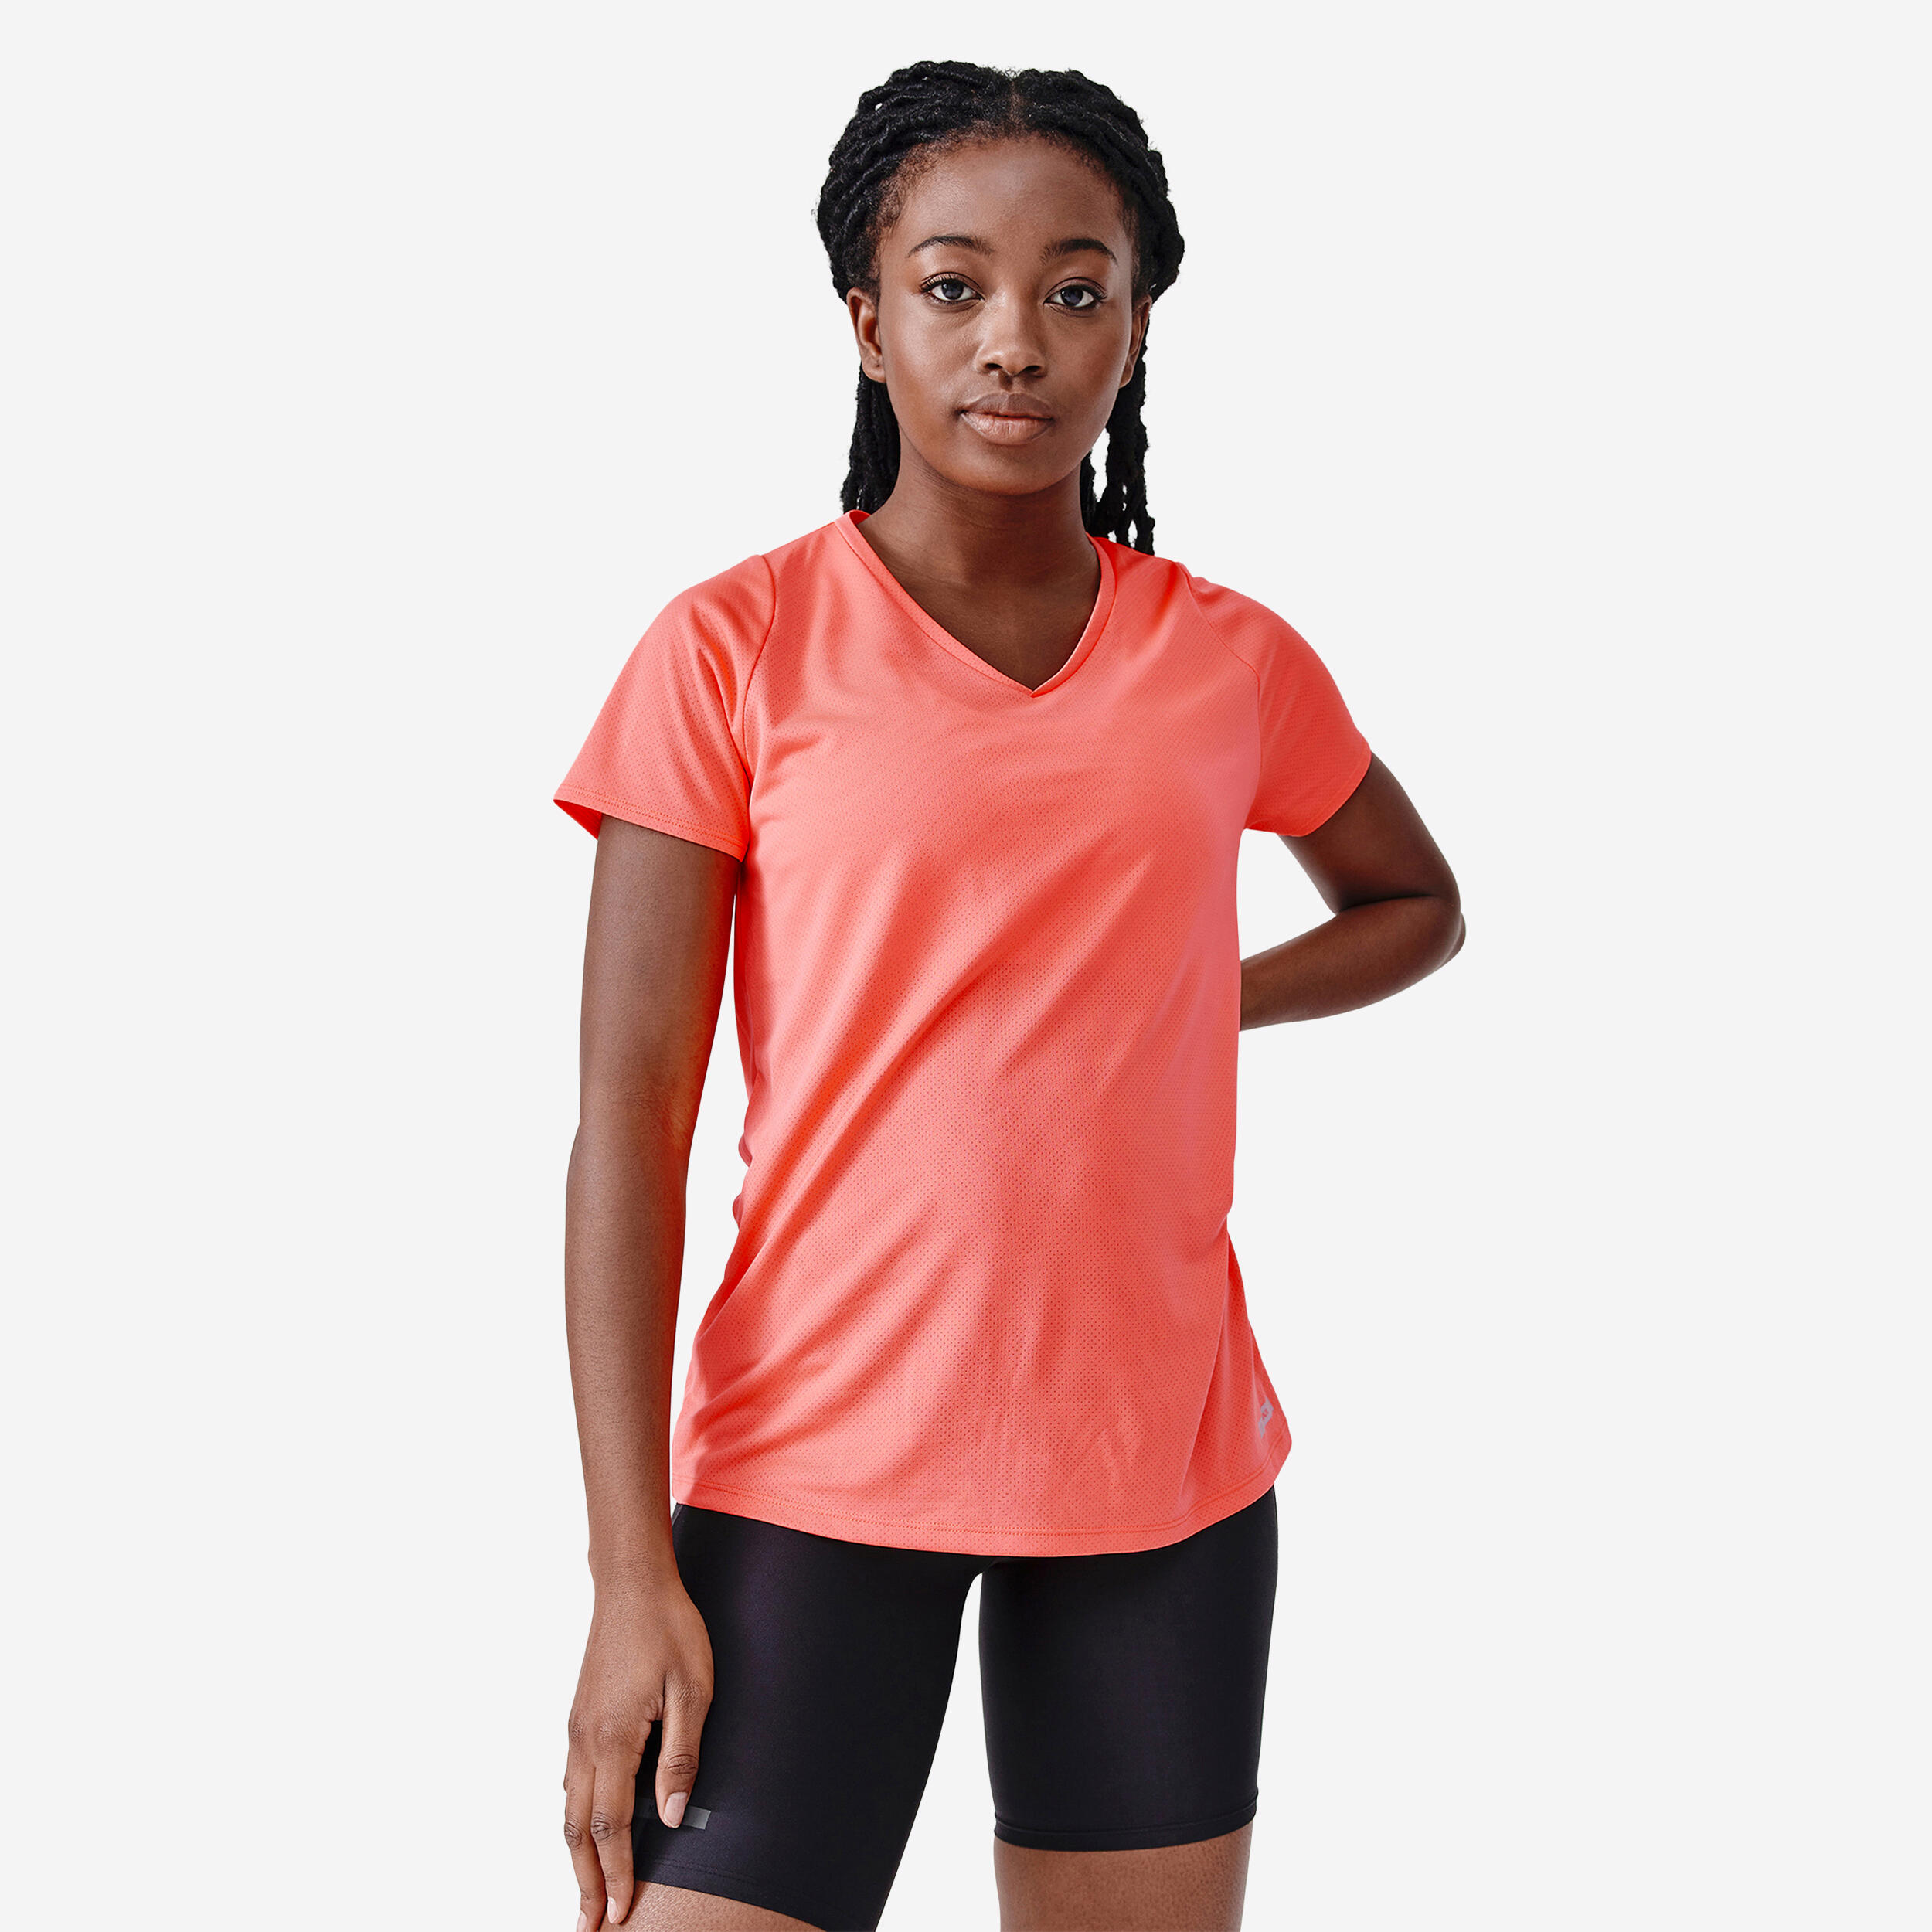 Women's breathable short-sleeved running T-shirt Dry - coral 1/7